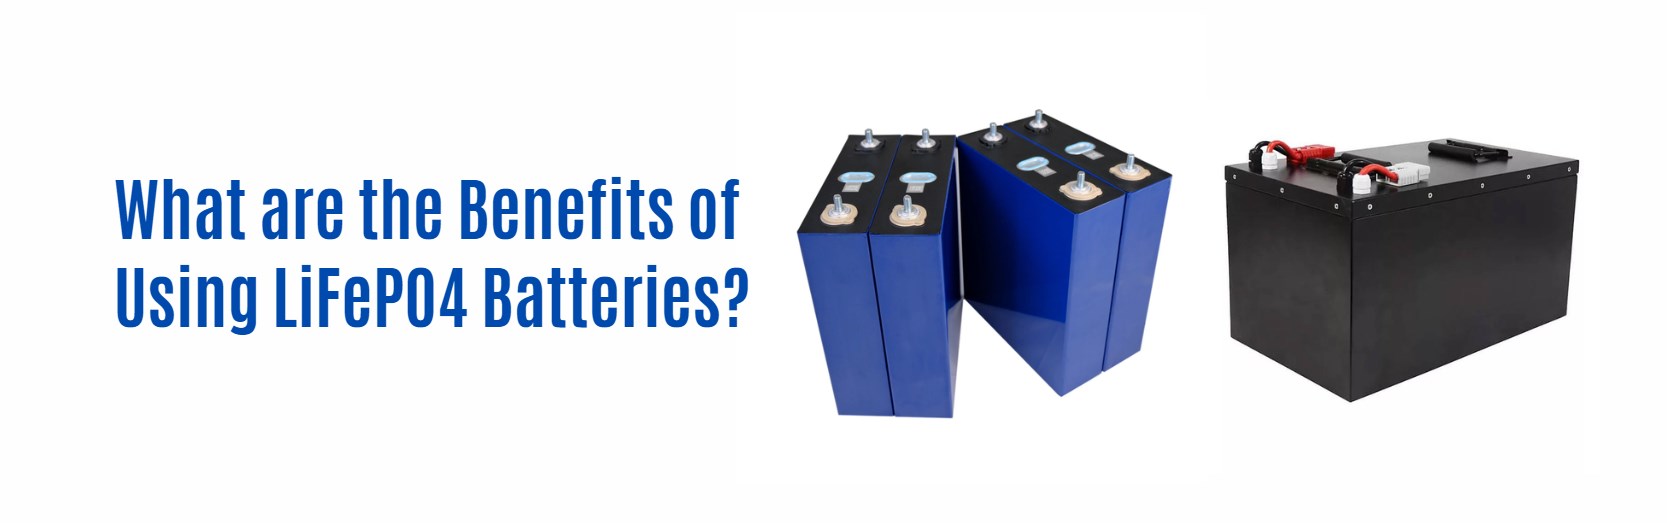 What are the Benefits of Using LiFePO4 Batteries?